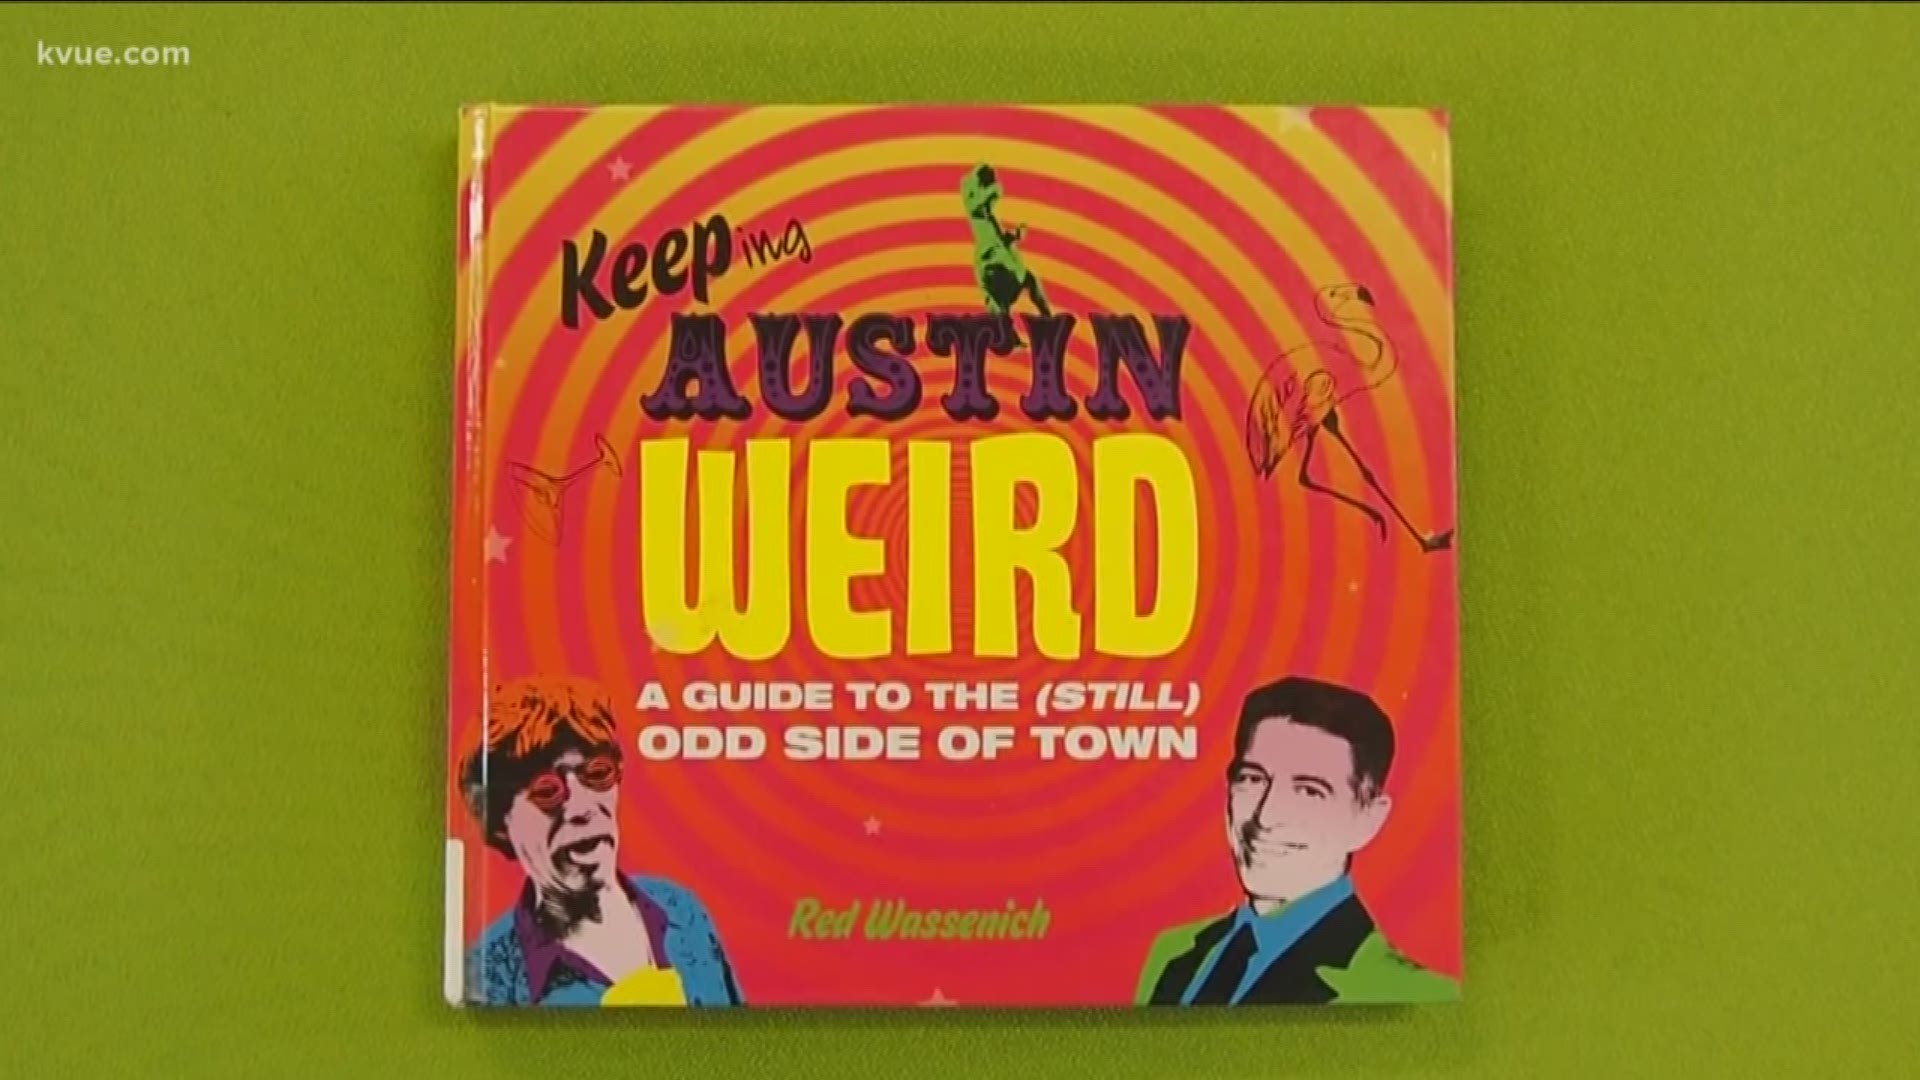 You've heard, seen it on t-ships and bumper stickers, you may have even said it. But where did the phrase "Keep Austin Weird" come from? And does it still apply?